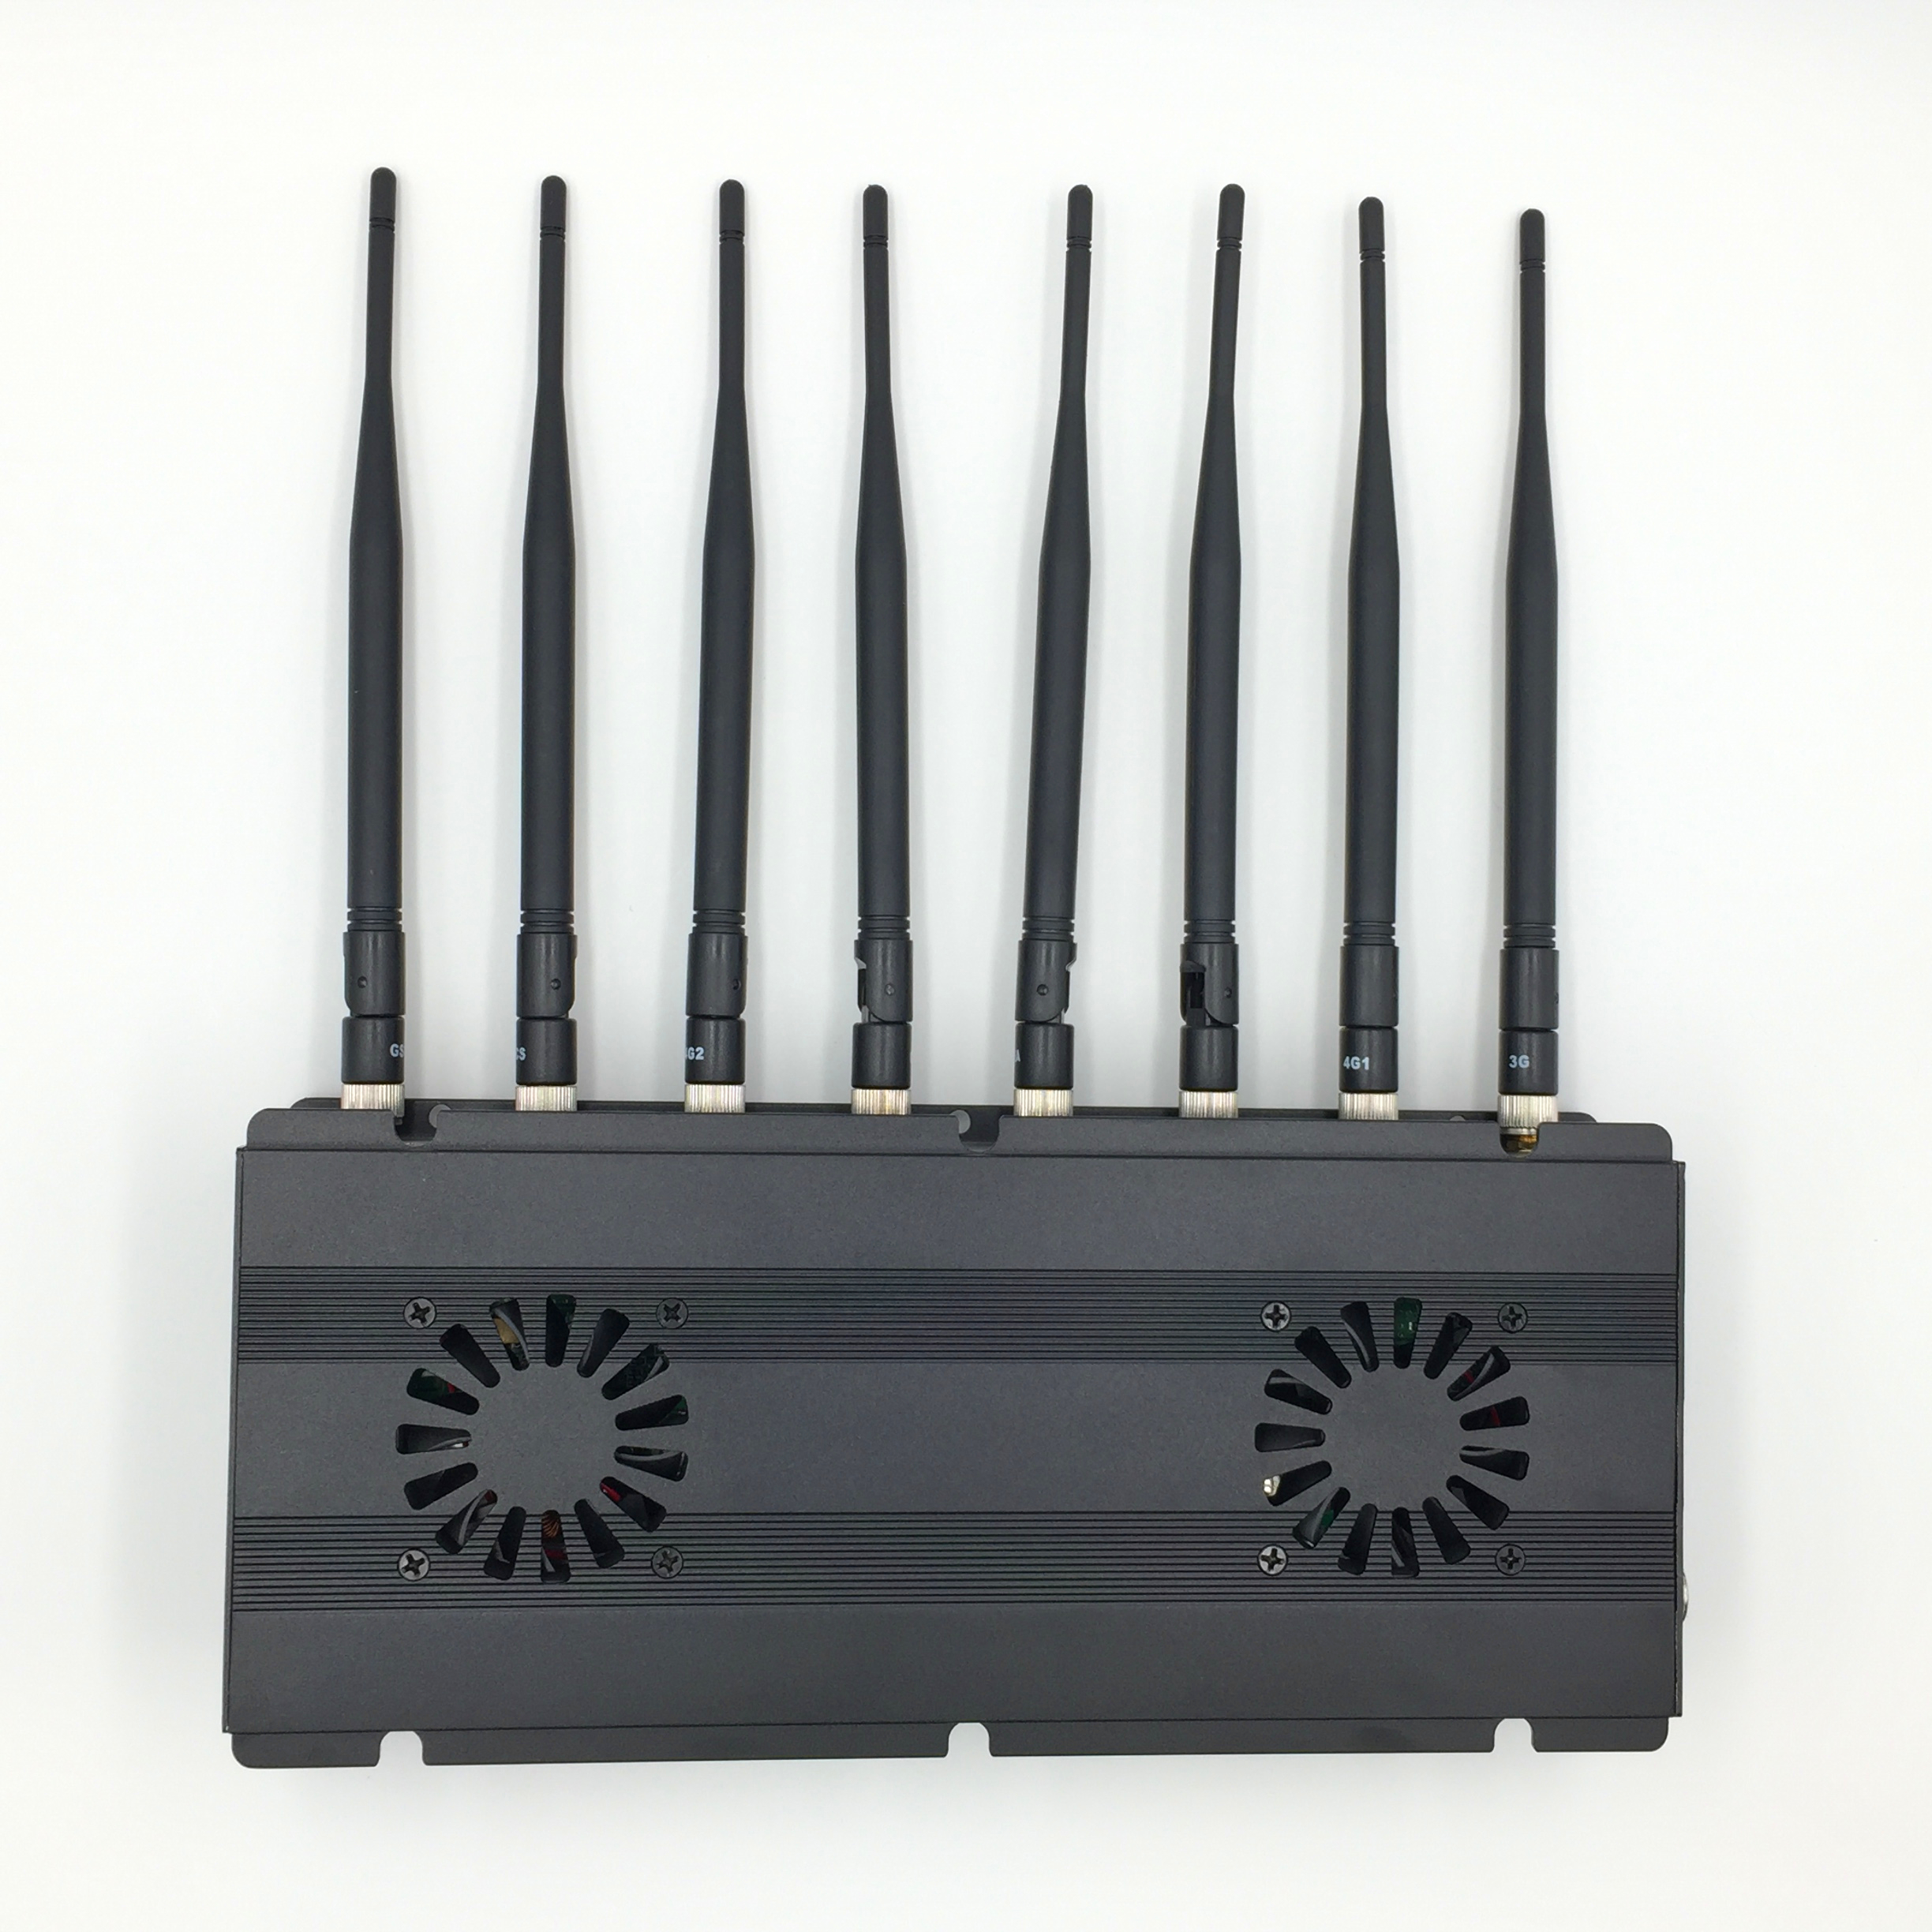 jammer legal entity vs | Black Desktop 8 Antenna Signal Jammers With GSM 3G 4G GPS WiFi LOJACK